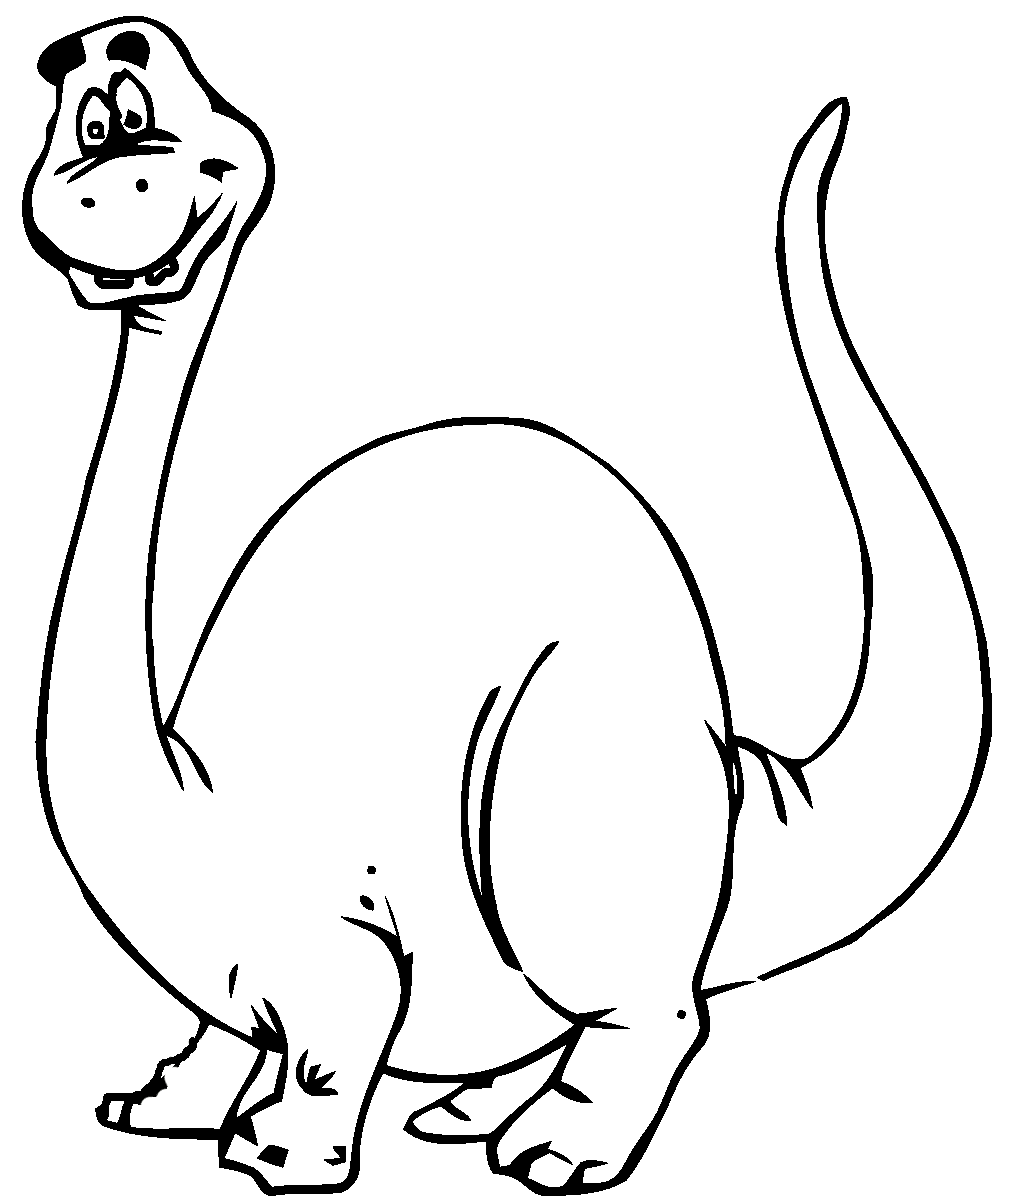 Dinosaur Coloring Pages (4) - Coloring Kids